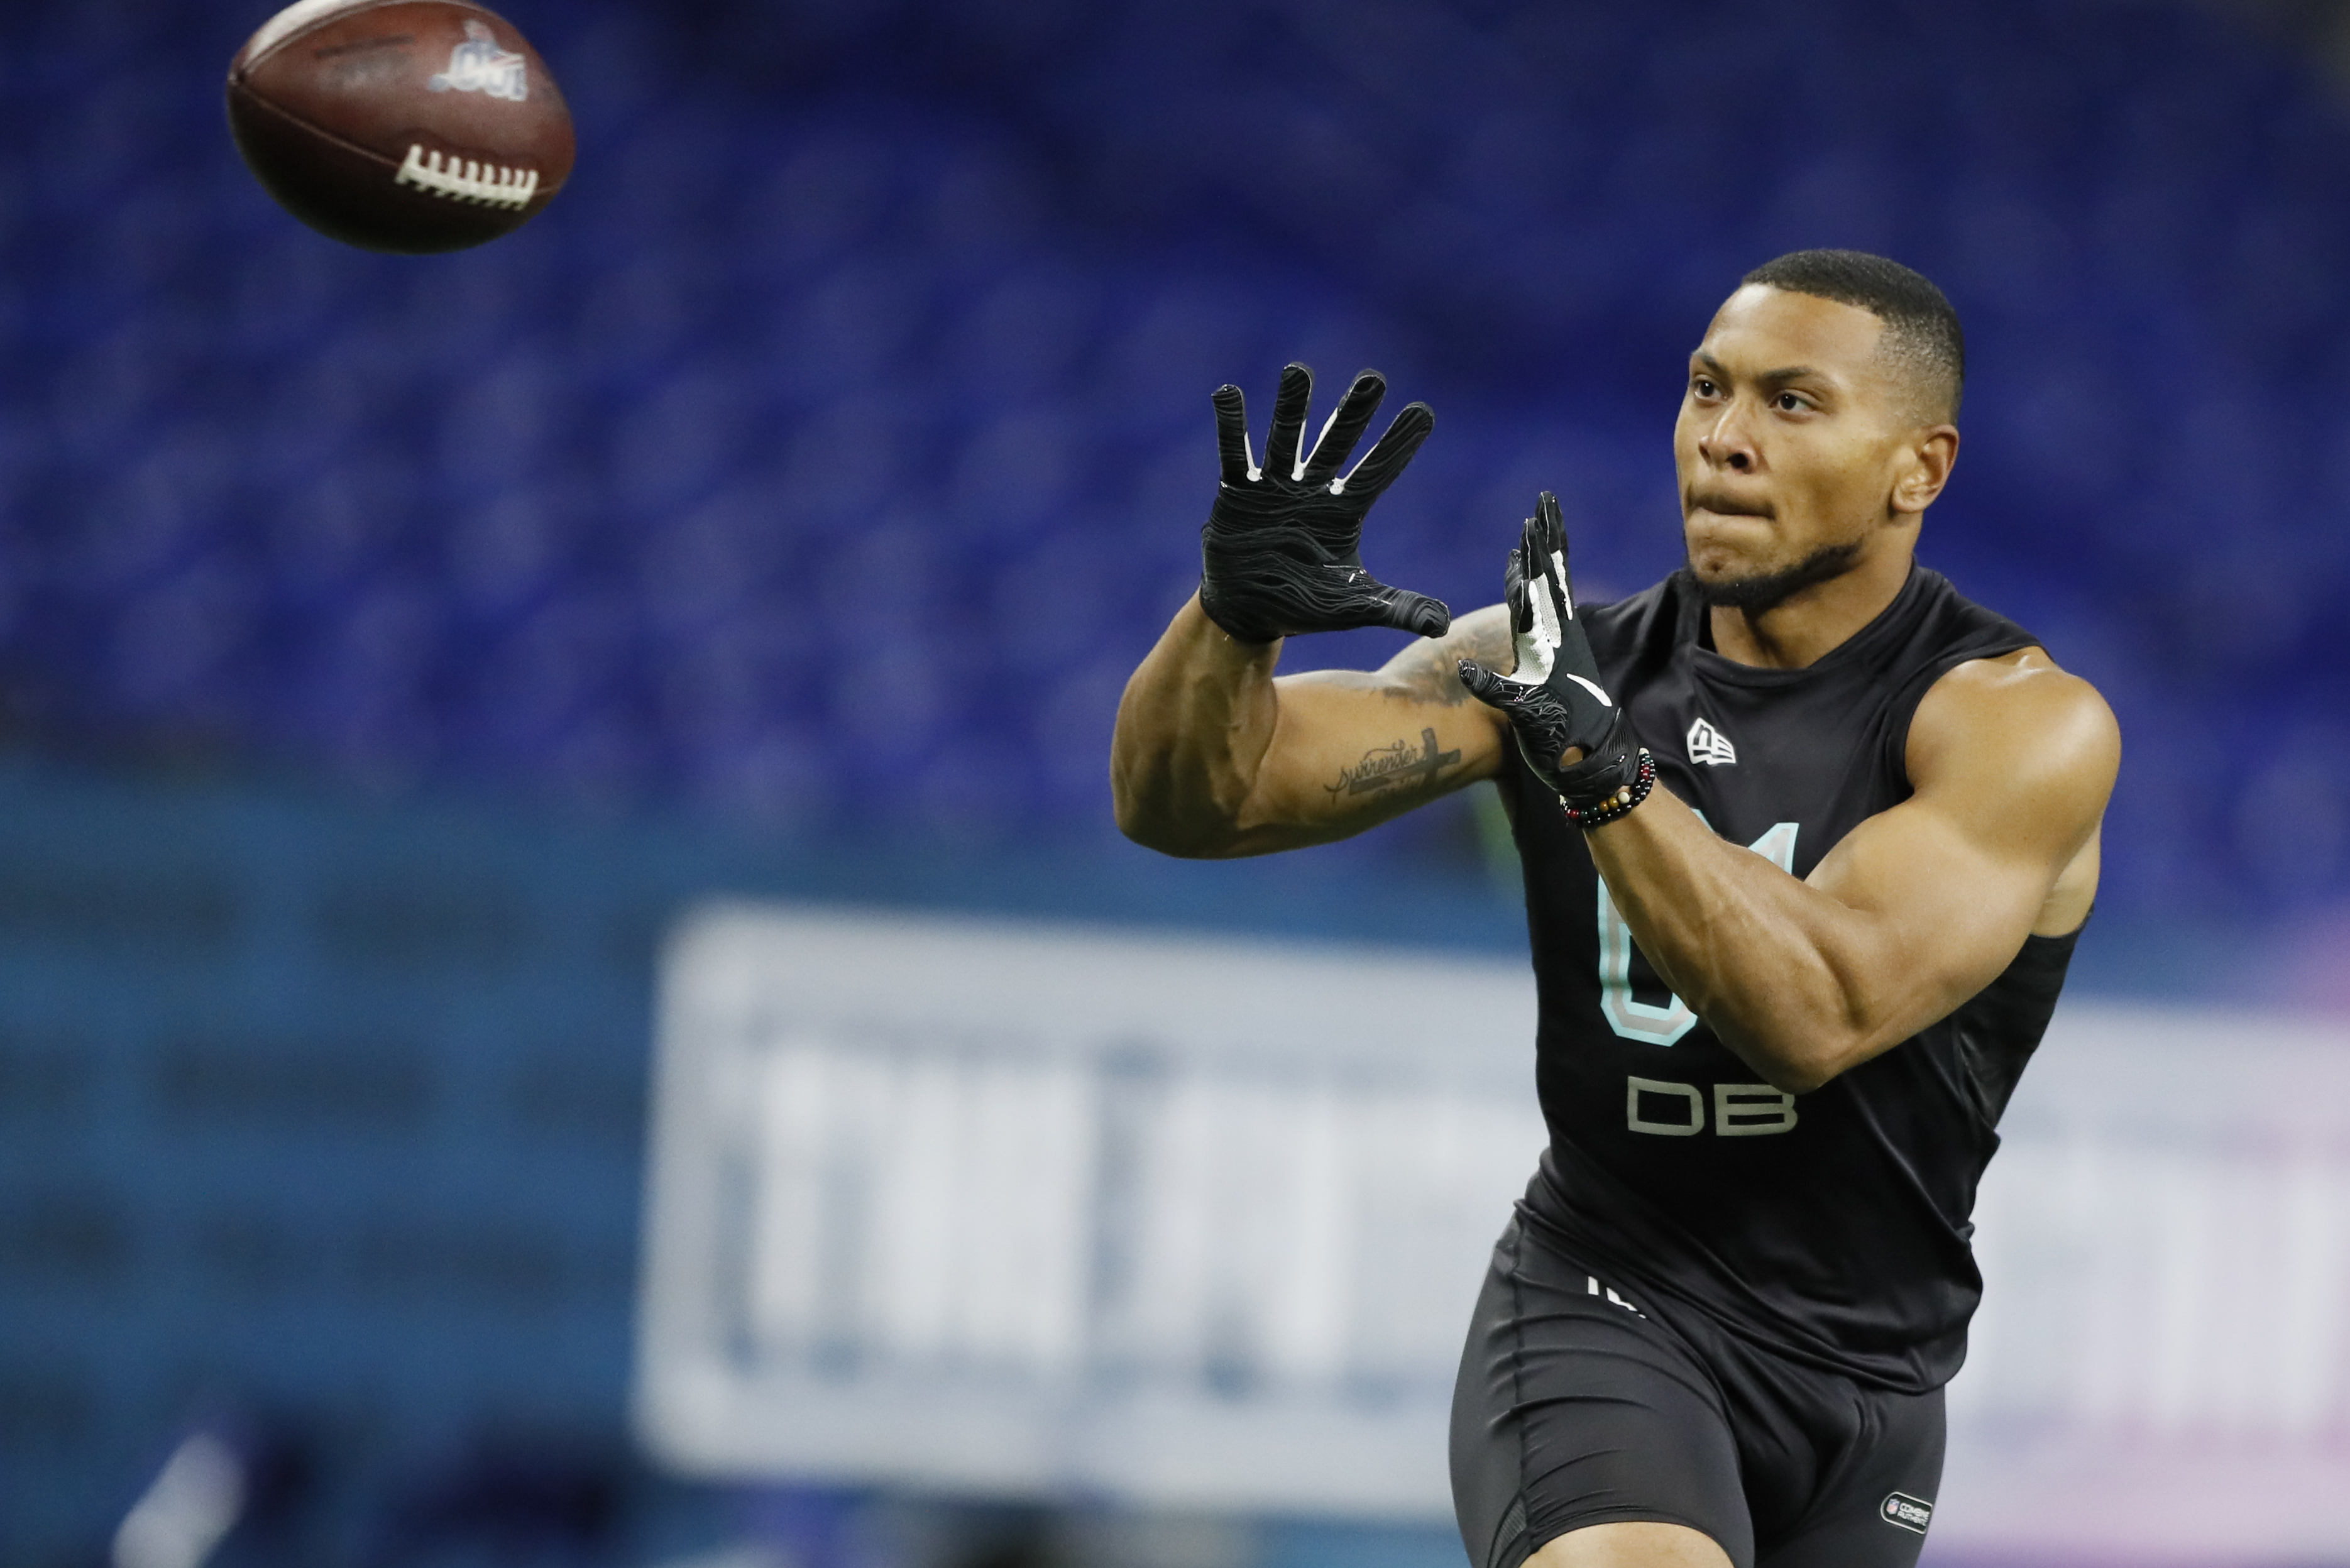 2022 NFL Combine Bubble Restrictions Removed After Pushback from Prospects, Agen..